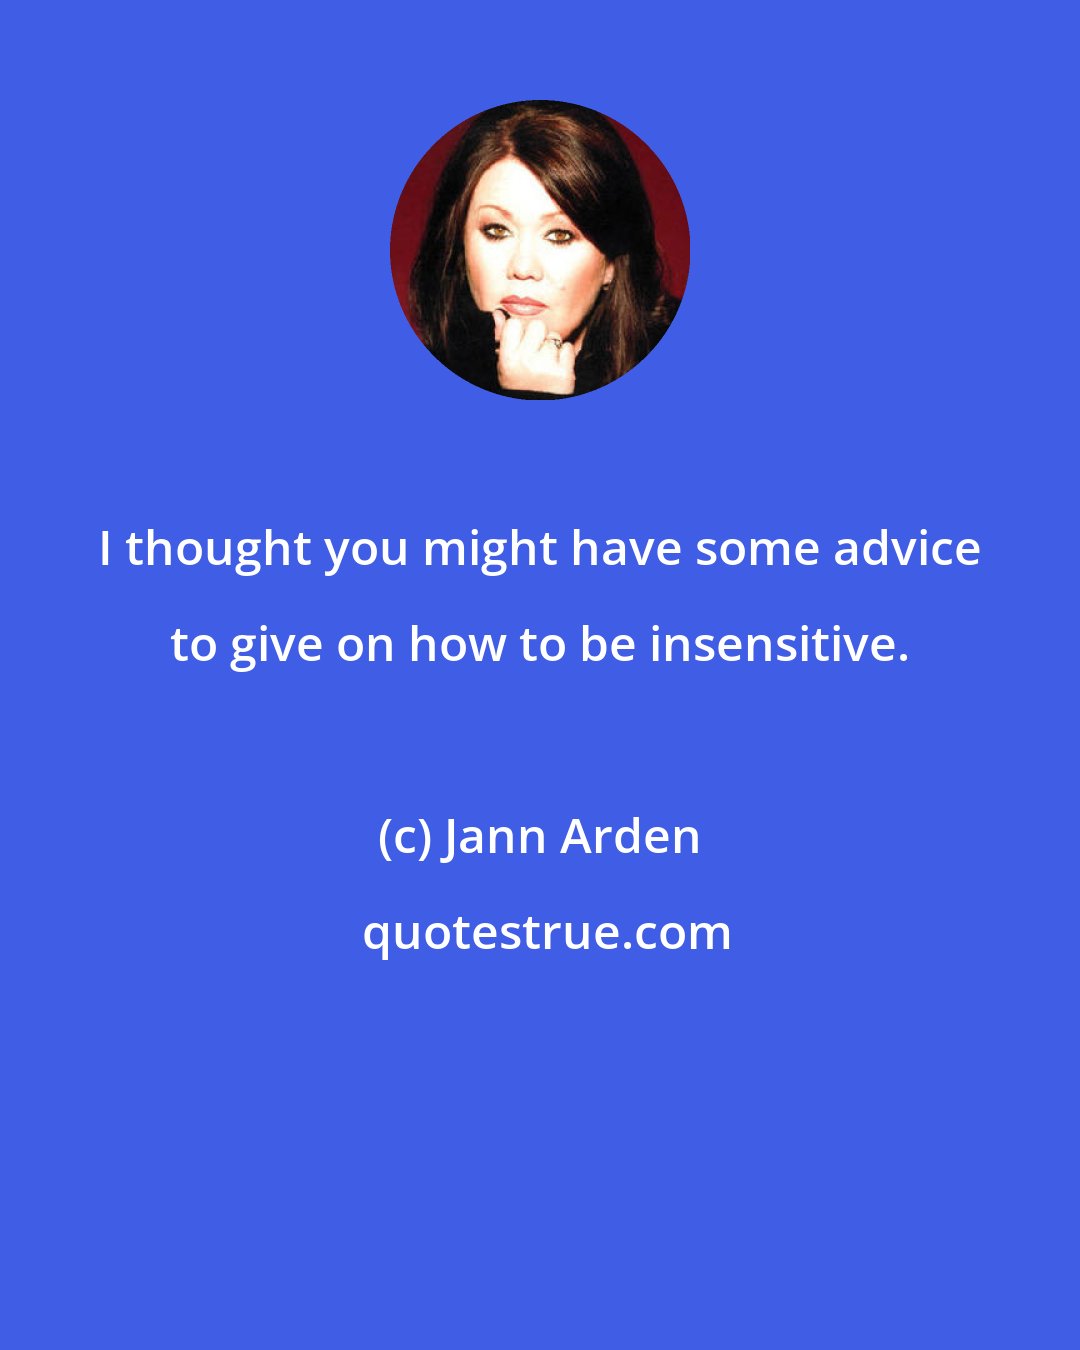 Jann Arden: I thought you might have some advice to give on how to be insensitive.